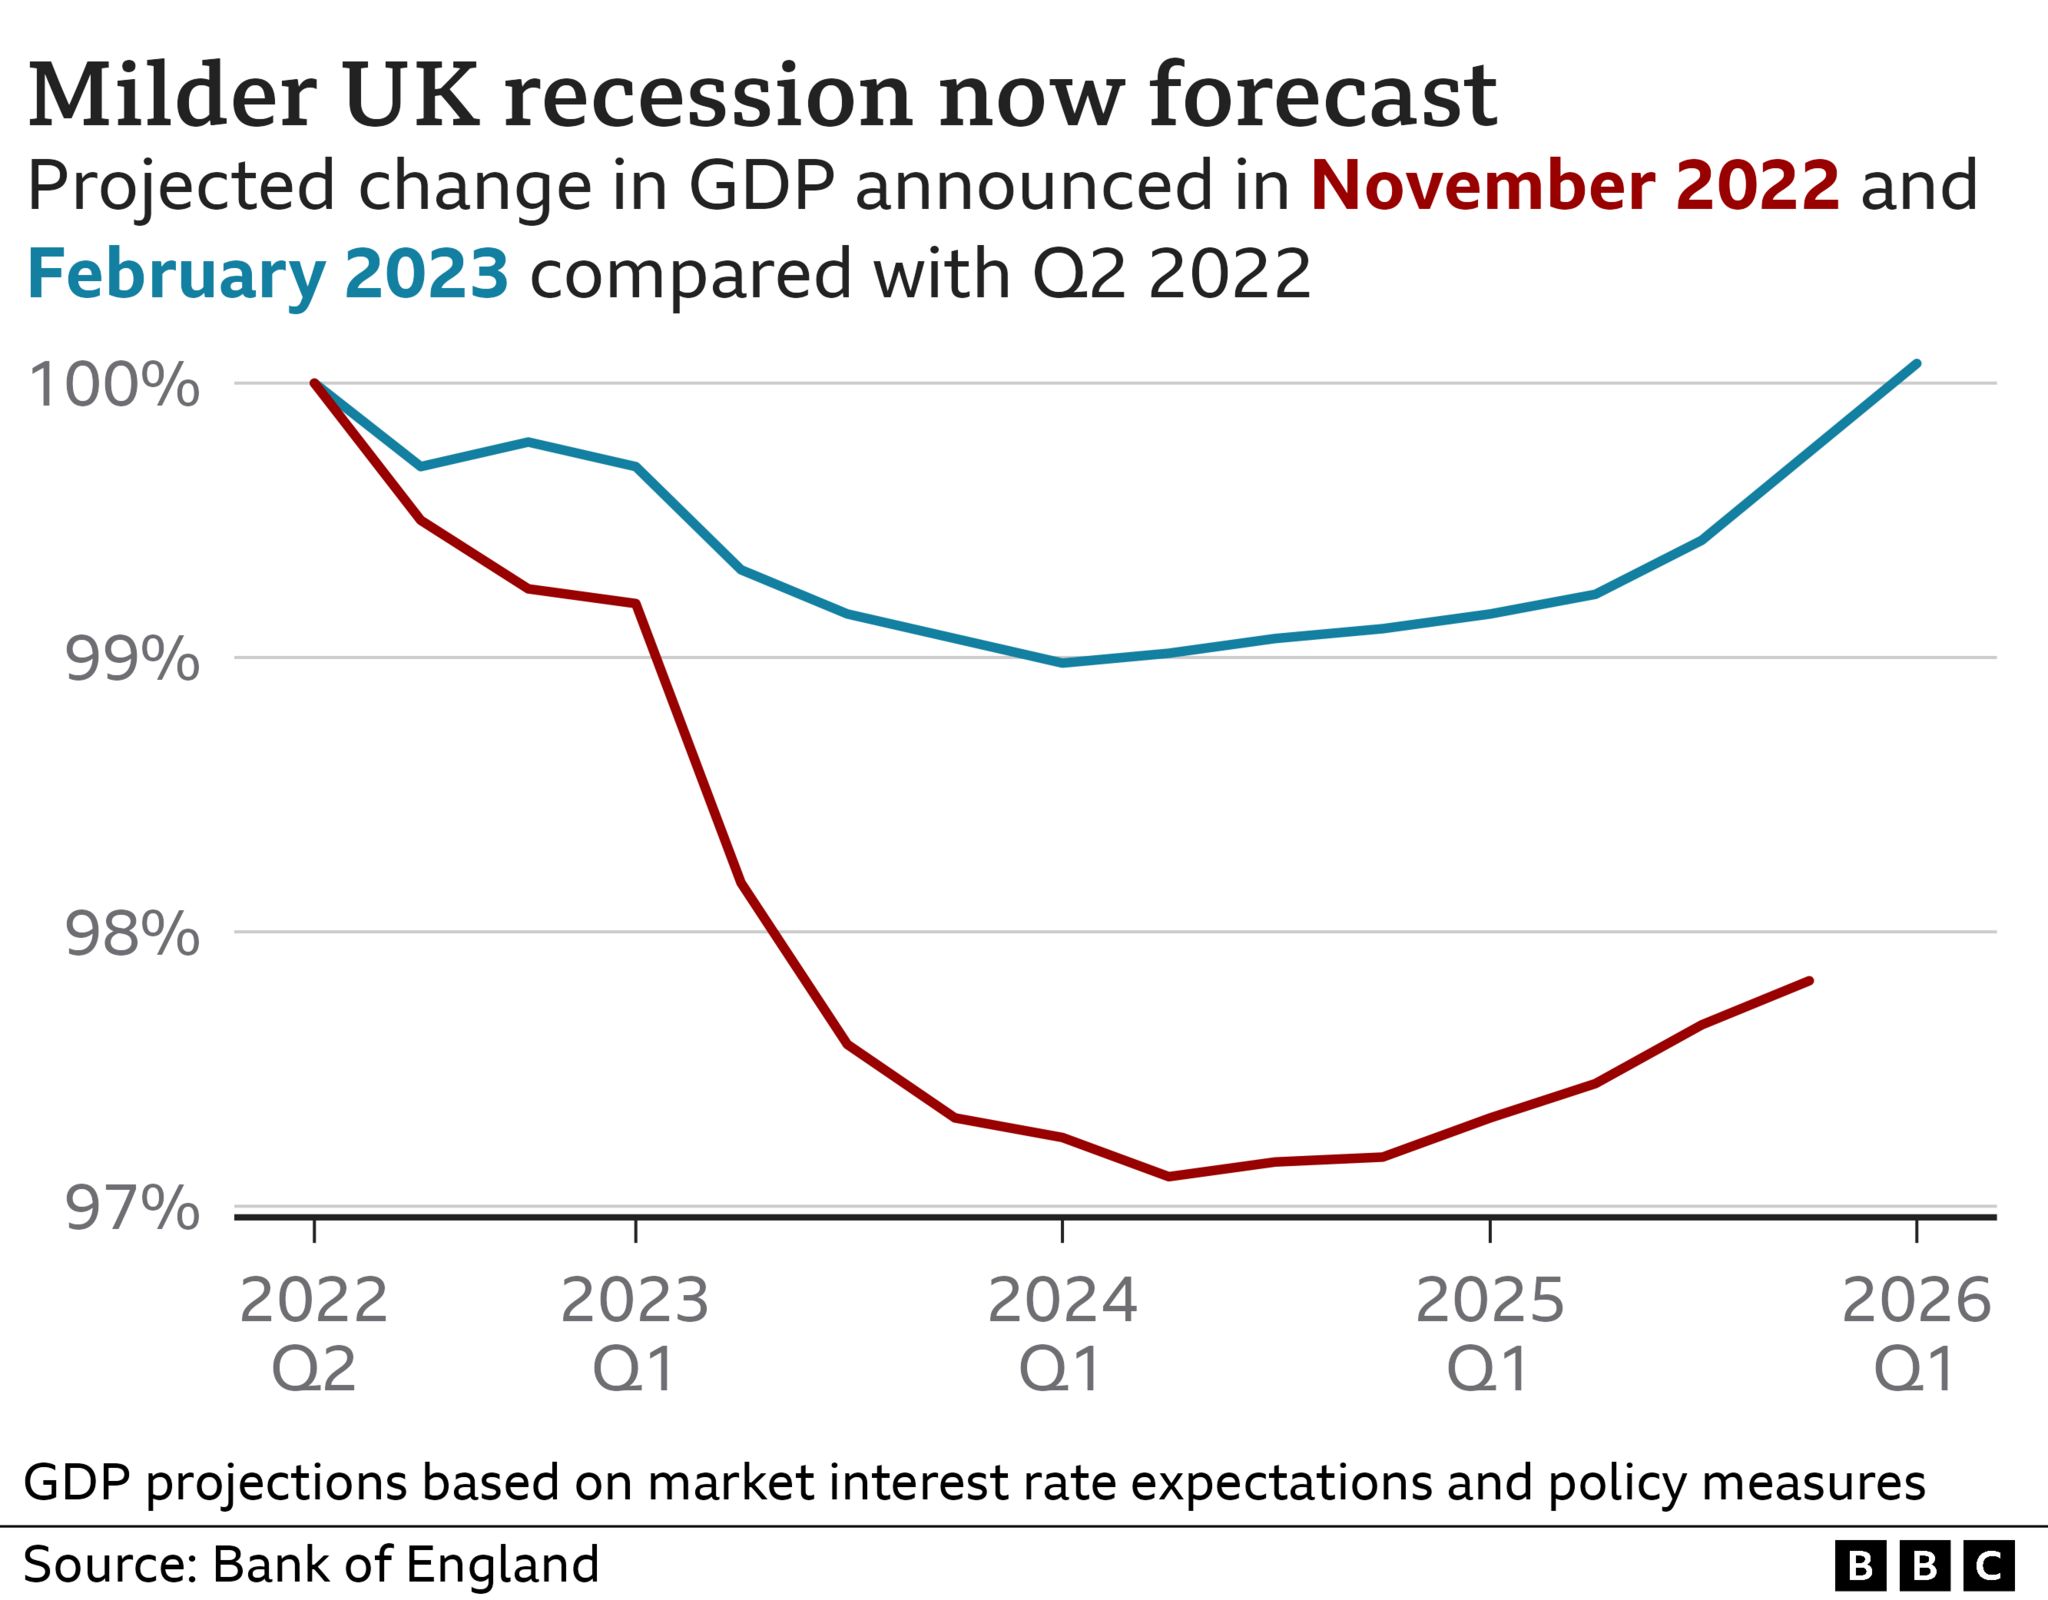 Chart showing Bank of England GDP forecasts